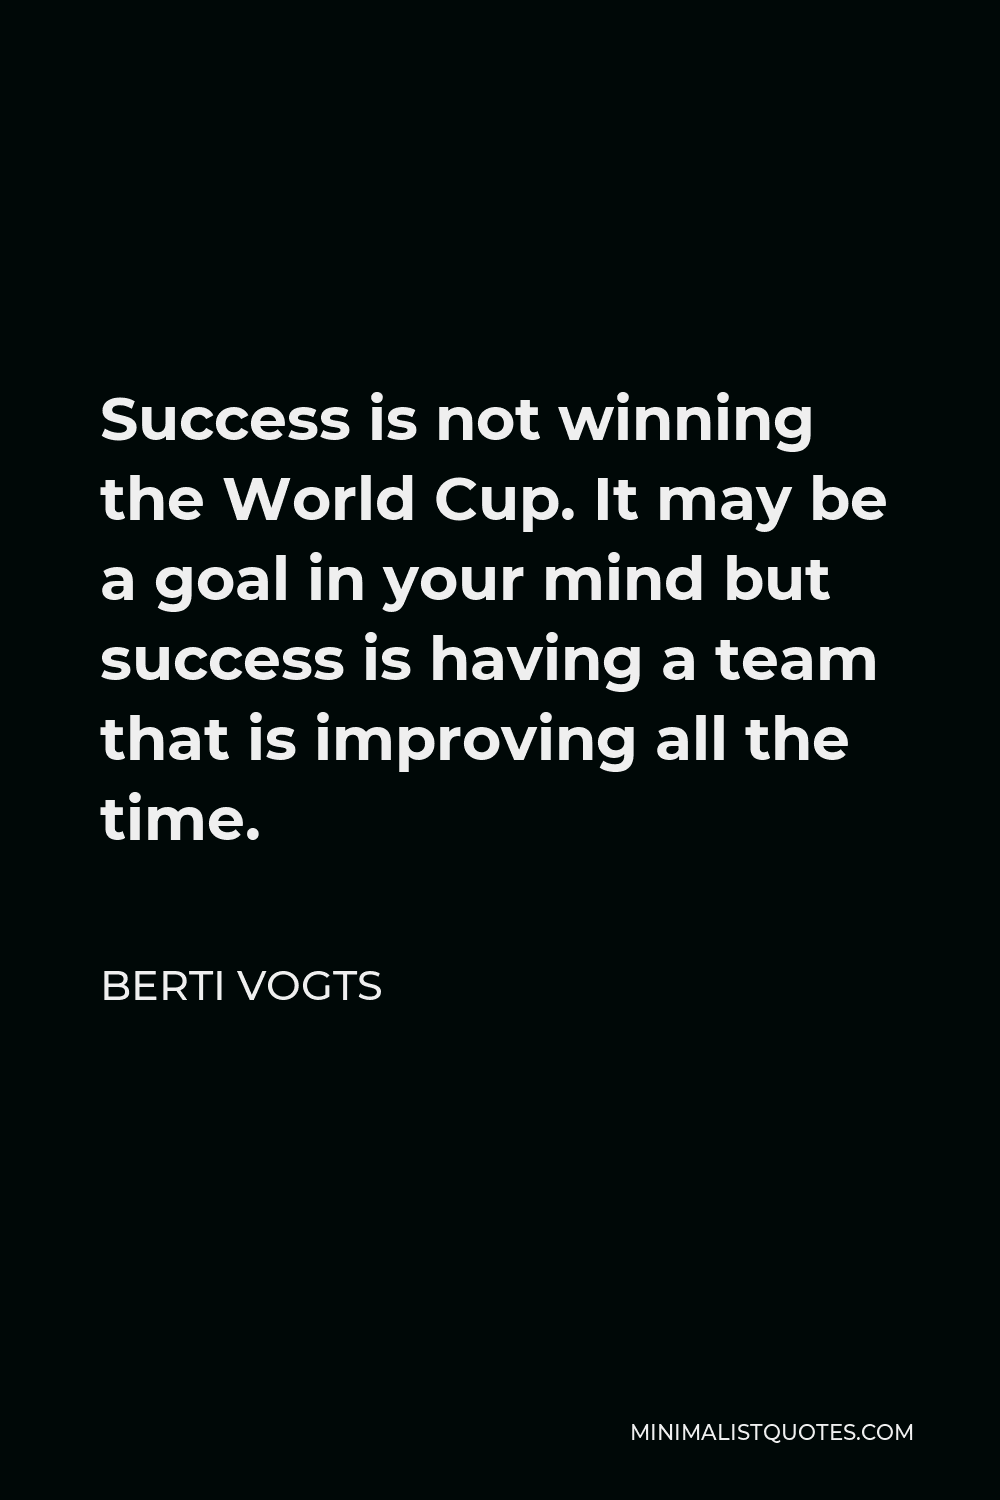 Berti Vogts Quote - Success is not winning the World Cup. It may be a goal in your mind but success is having a team that is improving all the time.